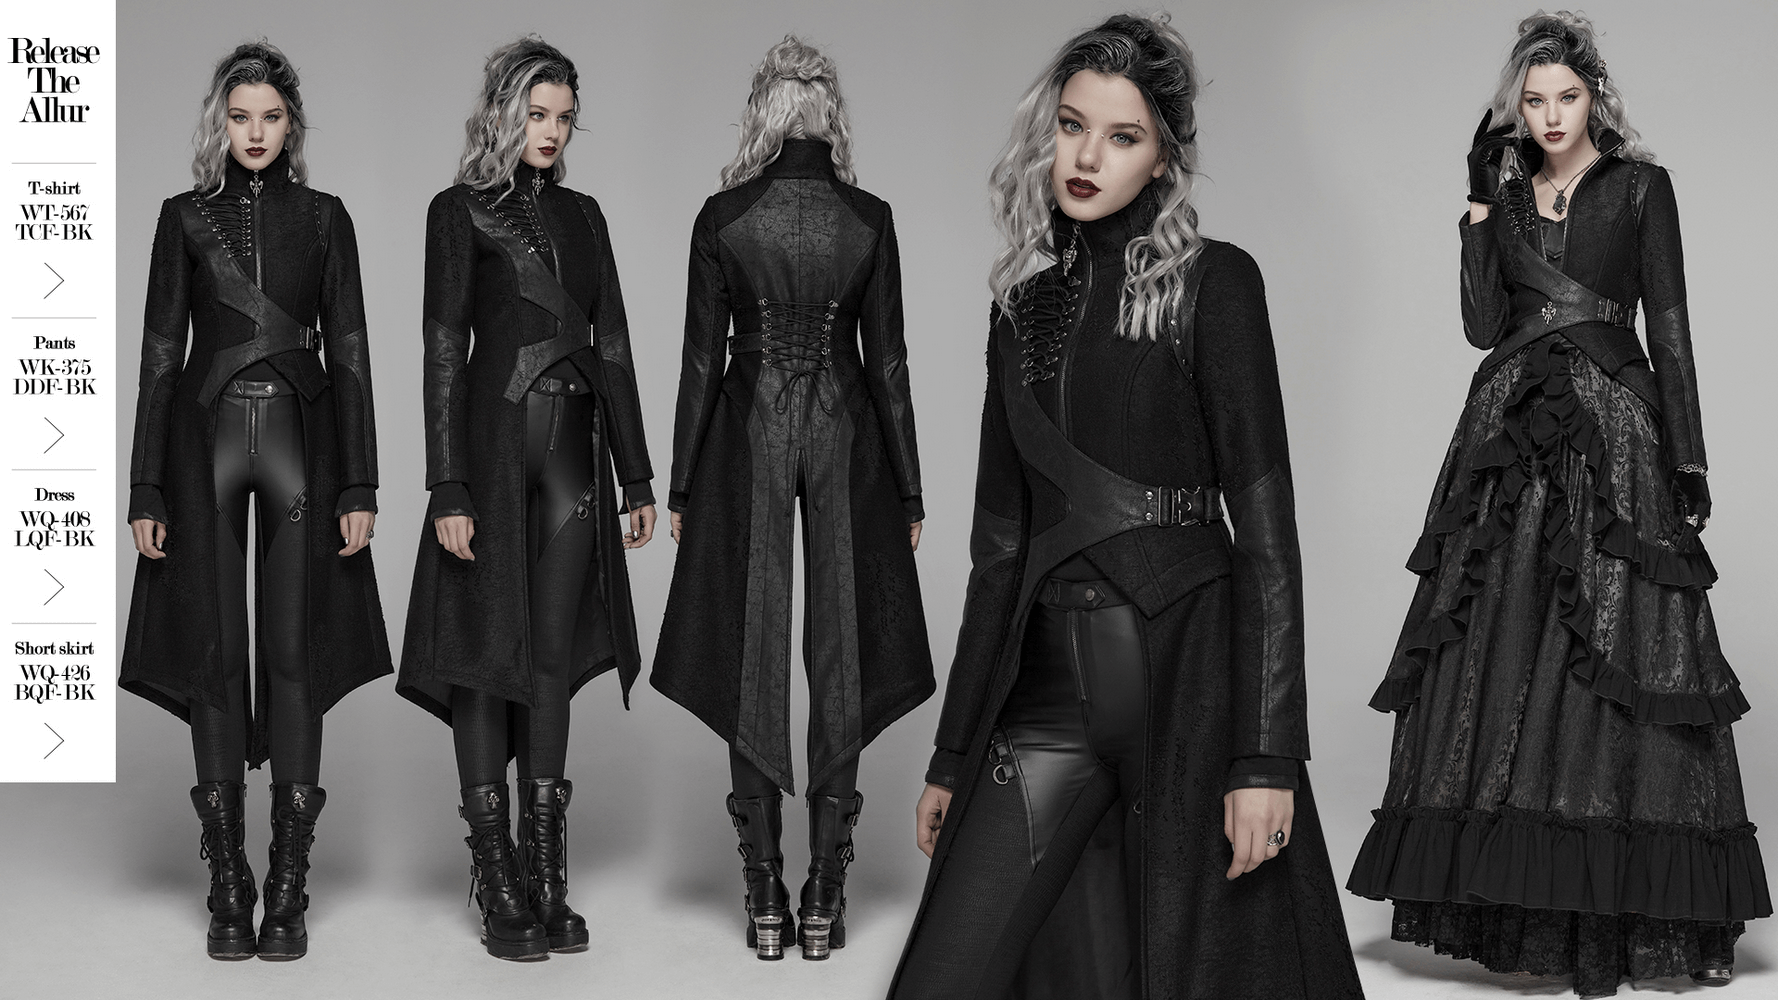 Edgy Punk Lace-Up Back Long Coat with Asymmetric Design